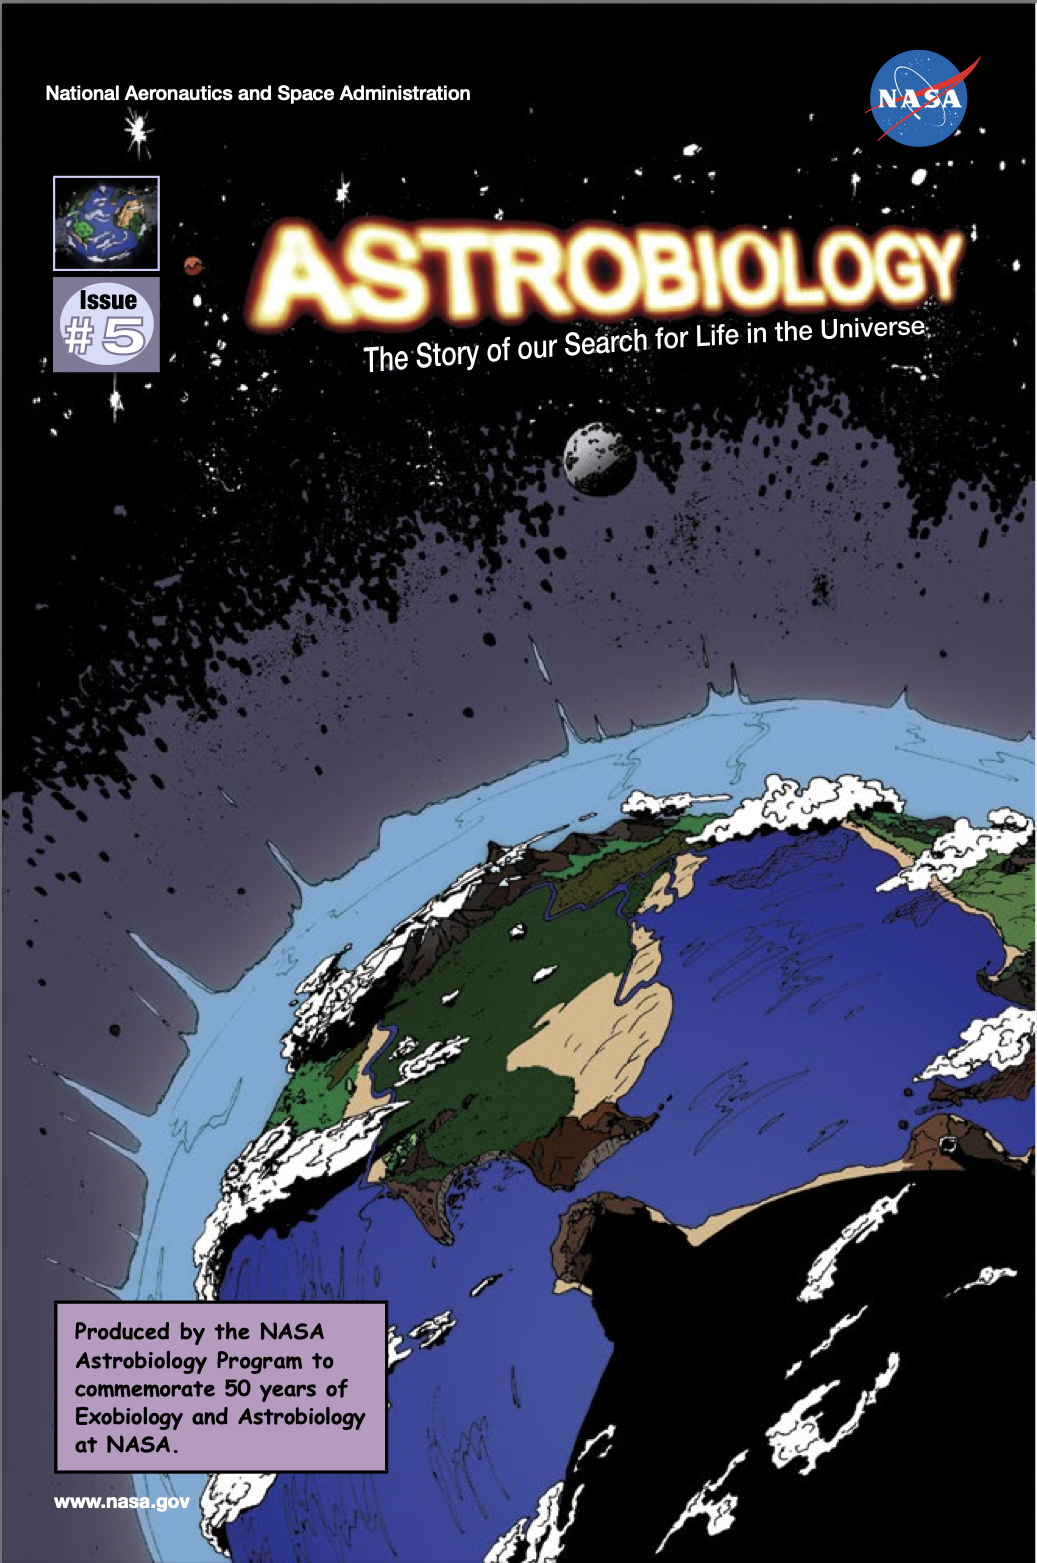 The first page of a comic titled “Astrobiology”, showing a view of the Earth from far away in space.